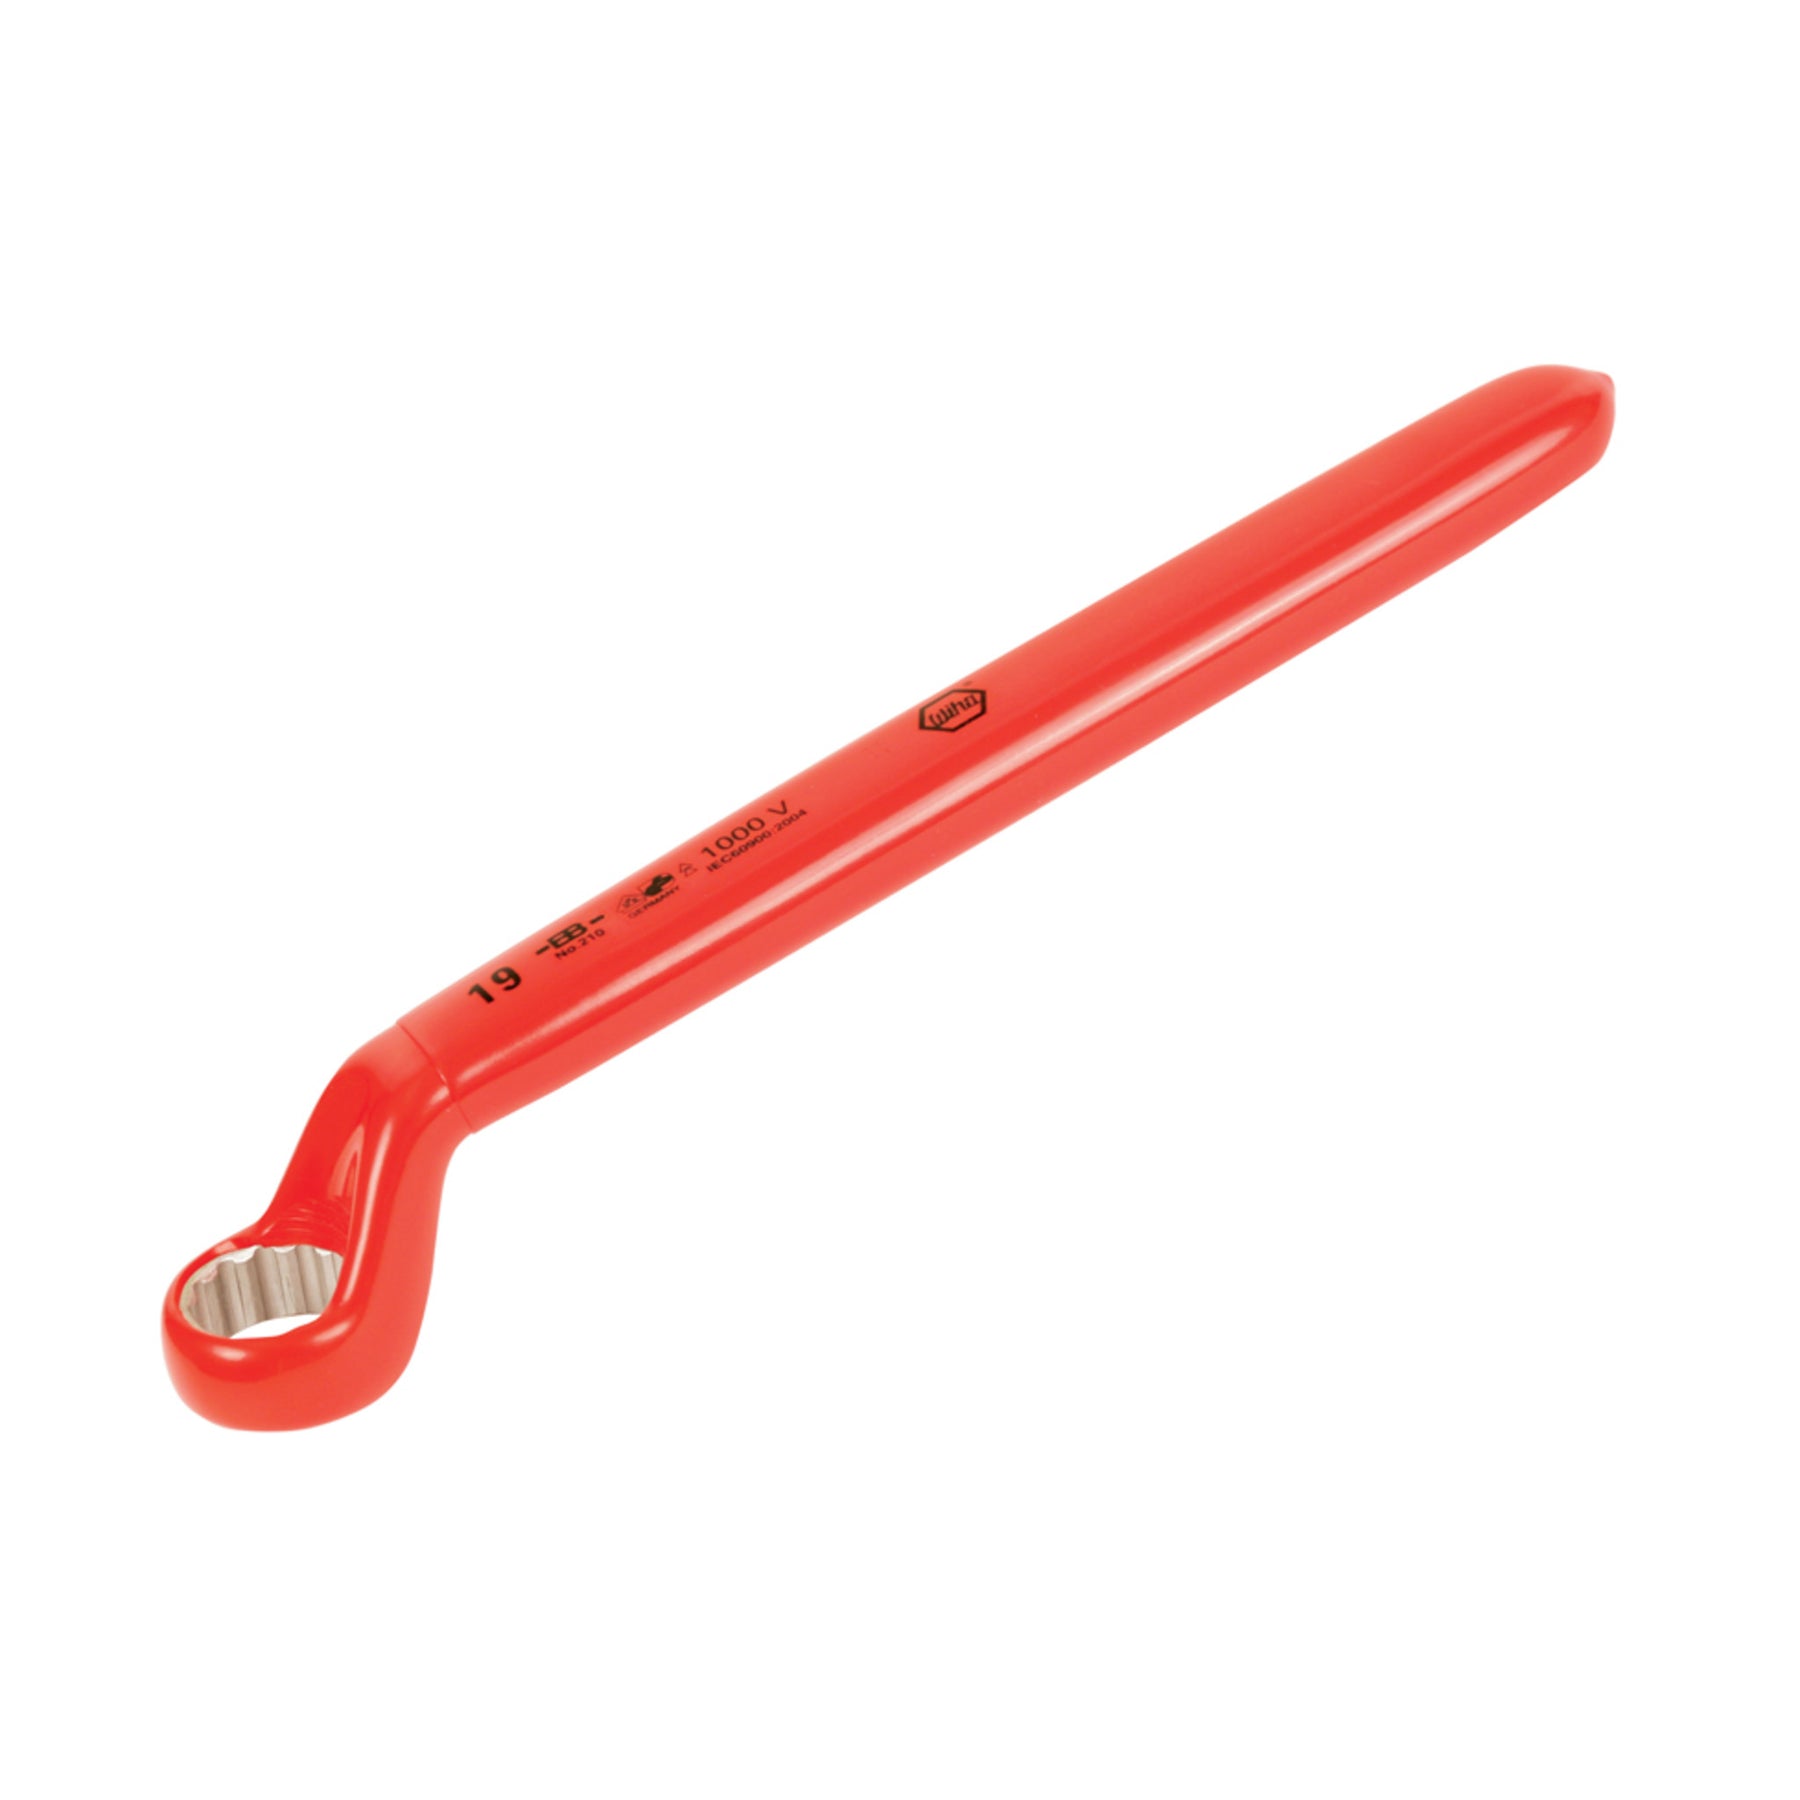 Insulated Deep Offset Wrench 17mm